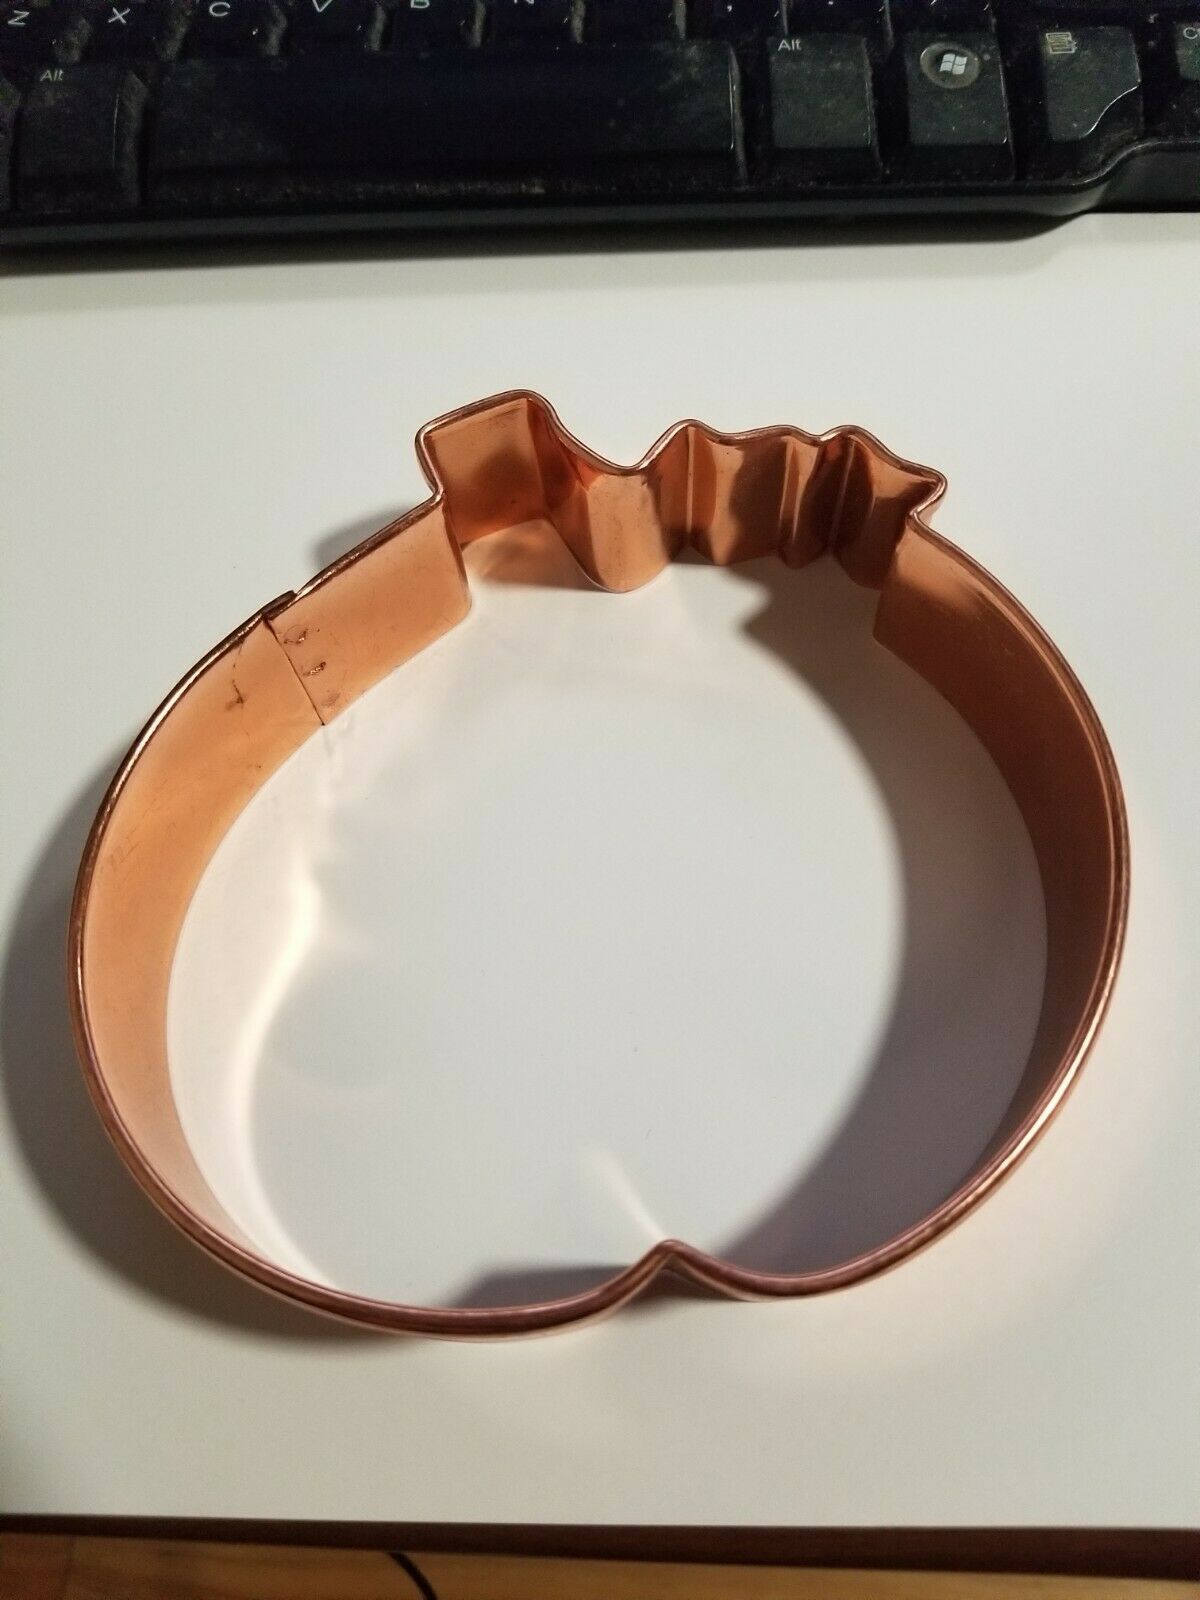 Never Used - Crate And Barrel Copper Cookie Cutter - Apple 5" - $2.96